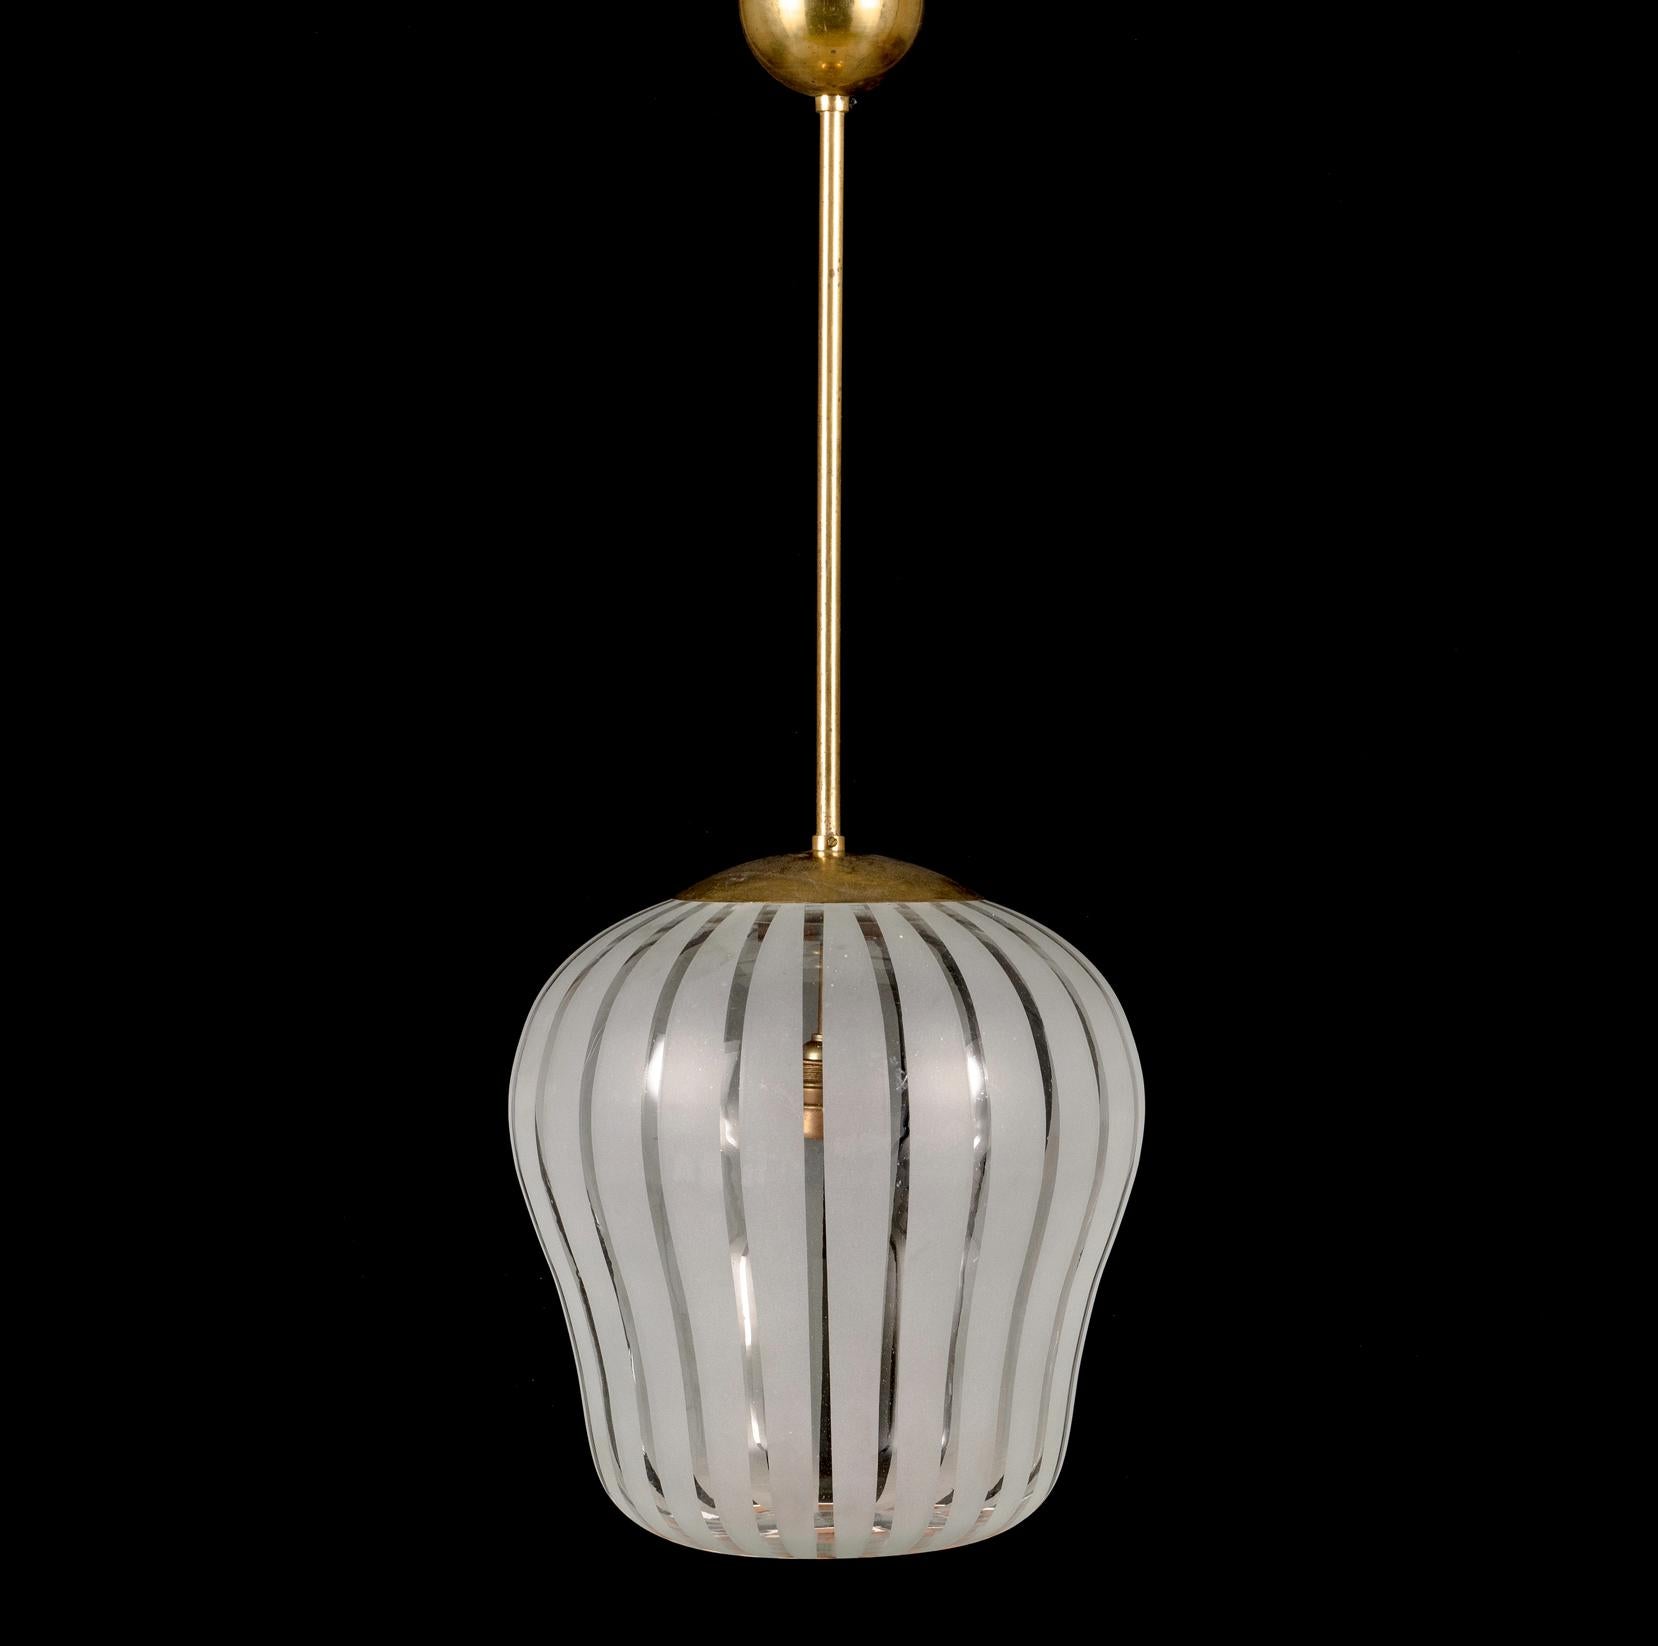 A pendant designed by Gunnel Nyman, nr 82504, Idman, Finland 1950s. 
Brass shaft, glass shade partially frosted glass, brand plaque, height 35, diameter 34 cm. Total height circa 85 cm.
Similar example featured at Idman catalog No140.
Rewiring